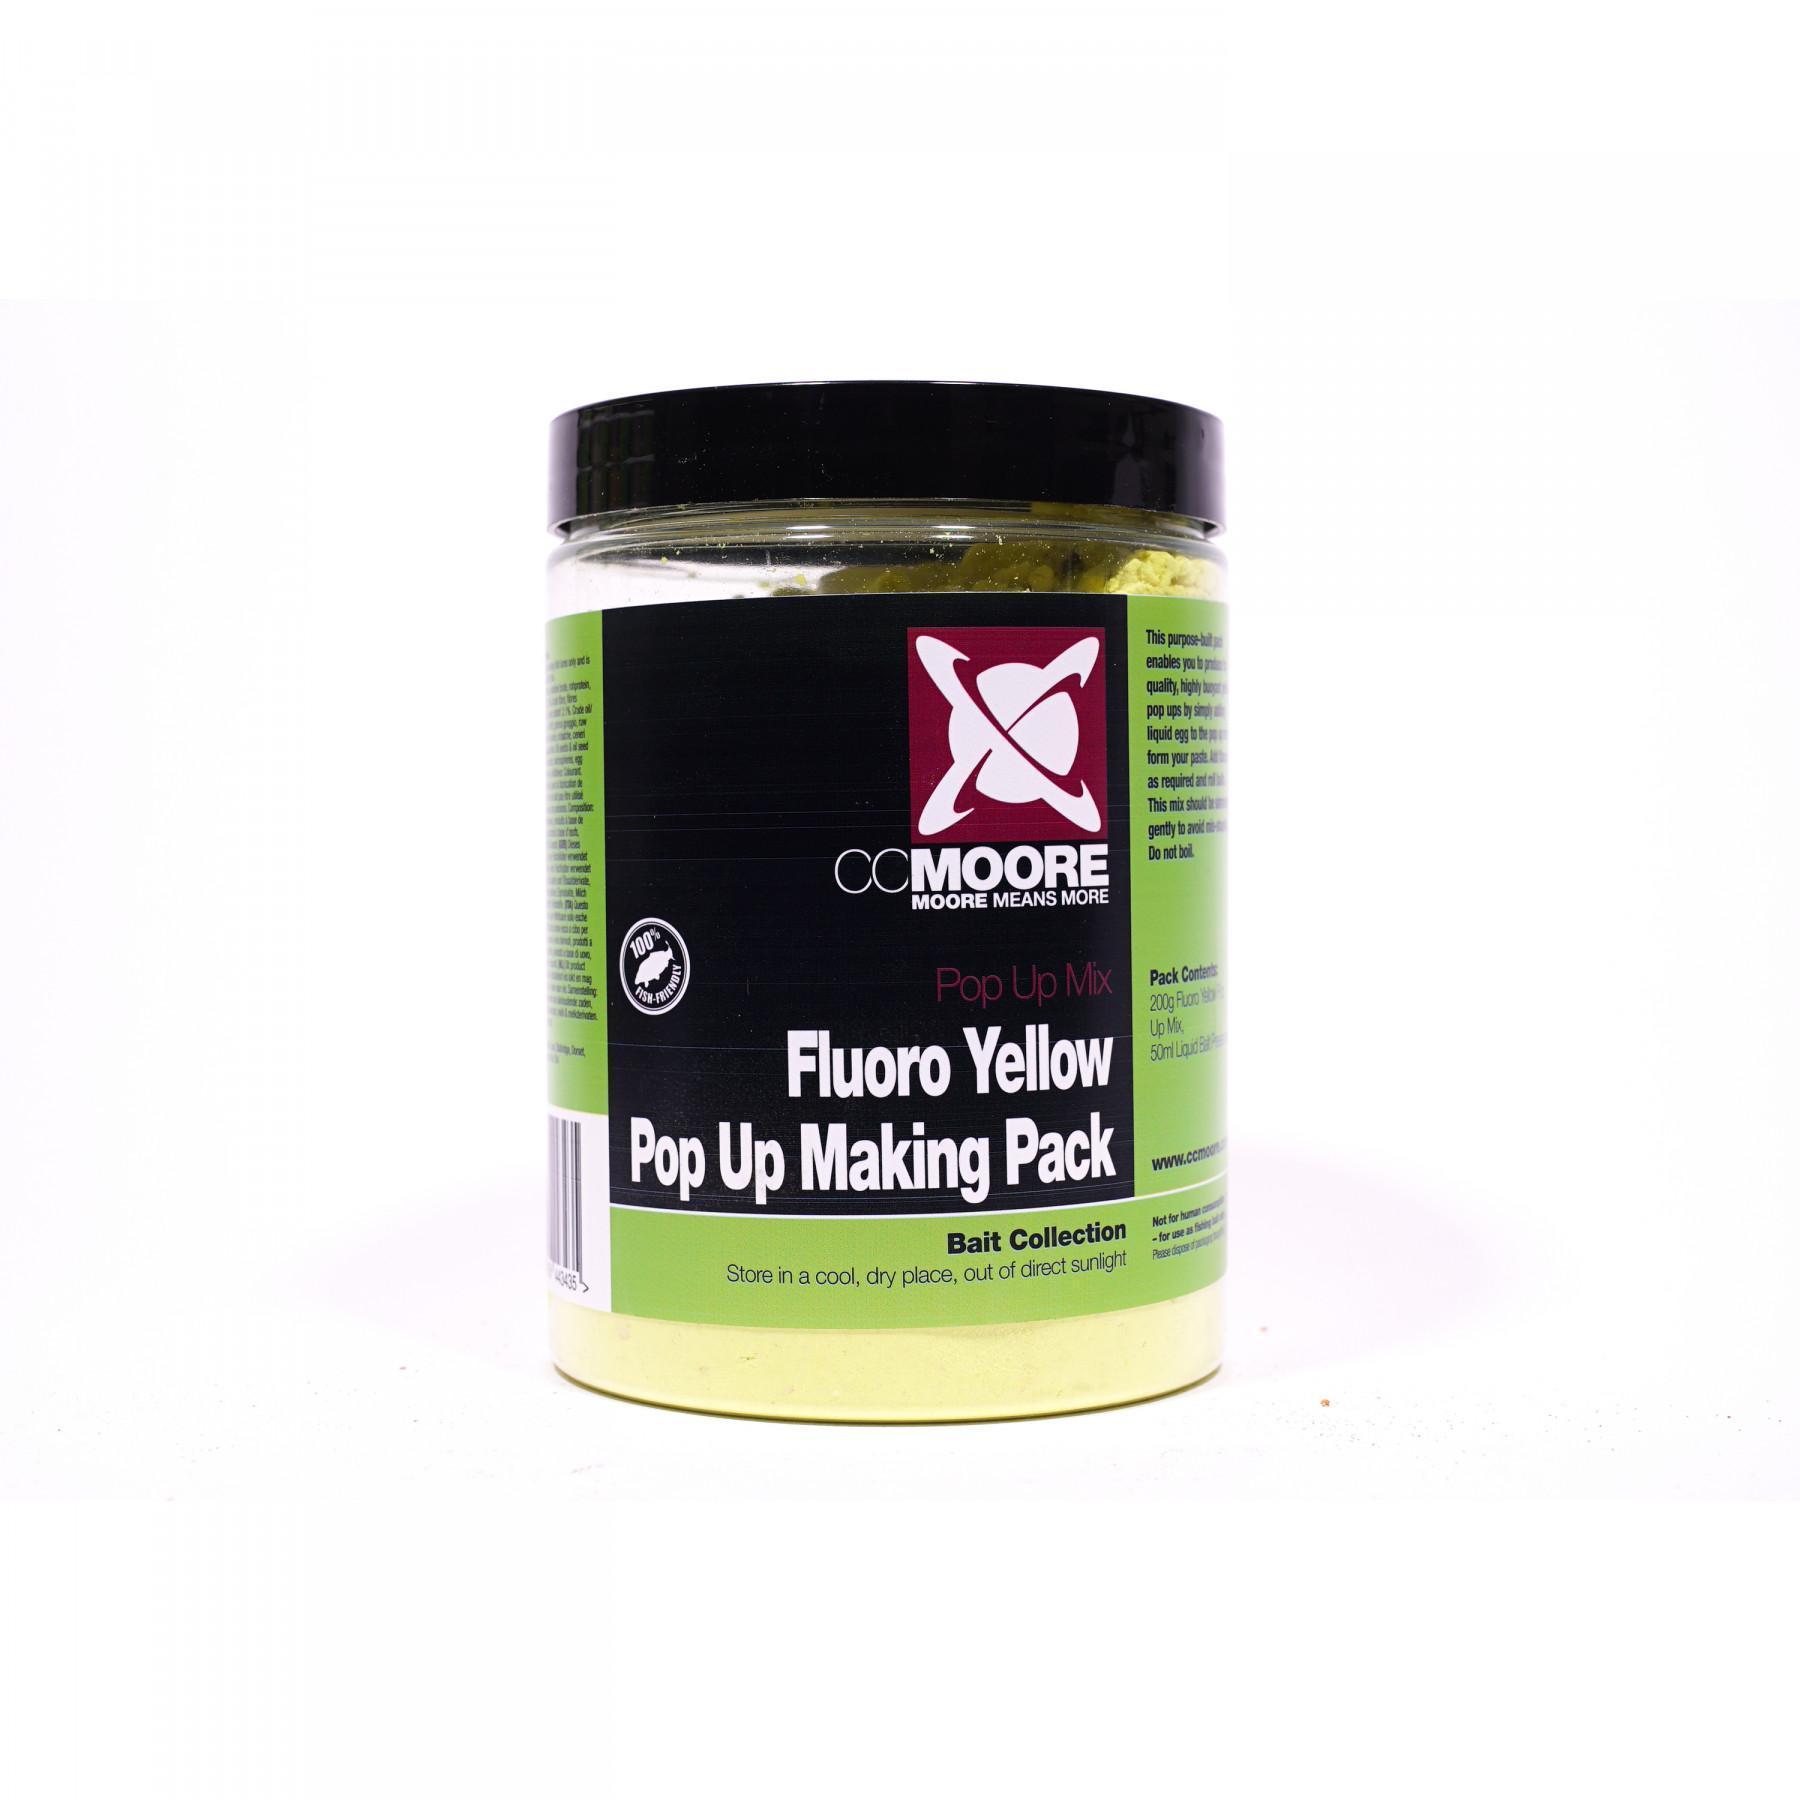 Mixture CCMoore Fluoro Yellow Pop Up Making Pack 200g